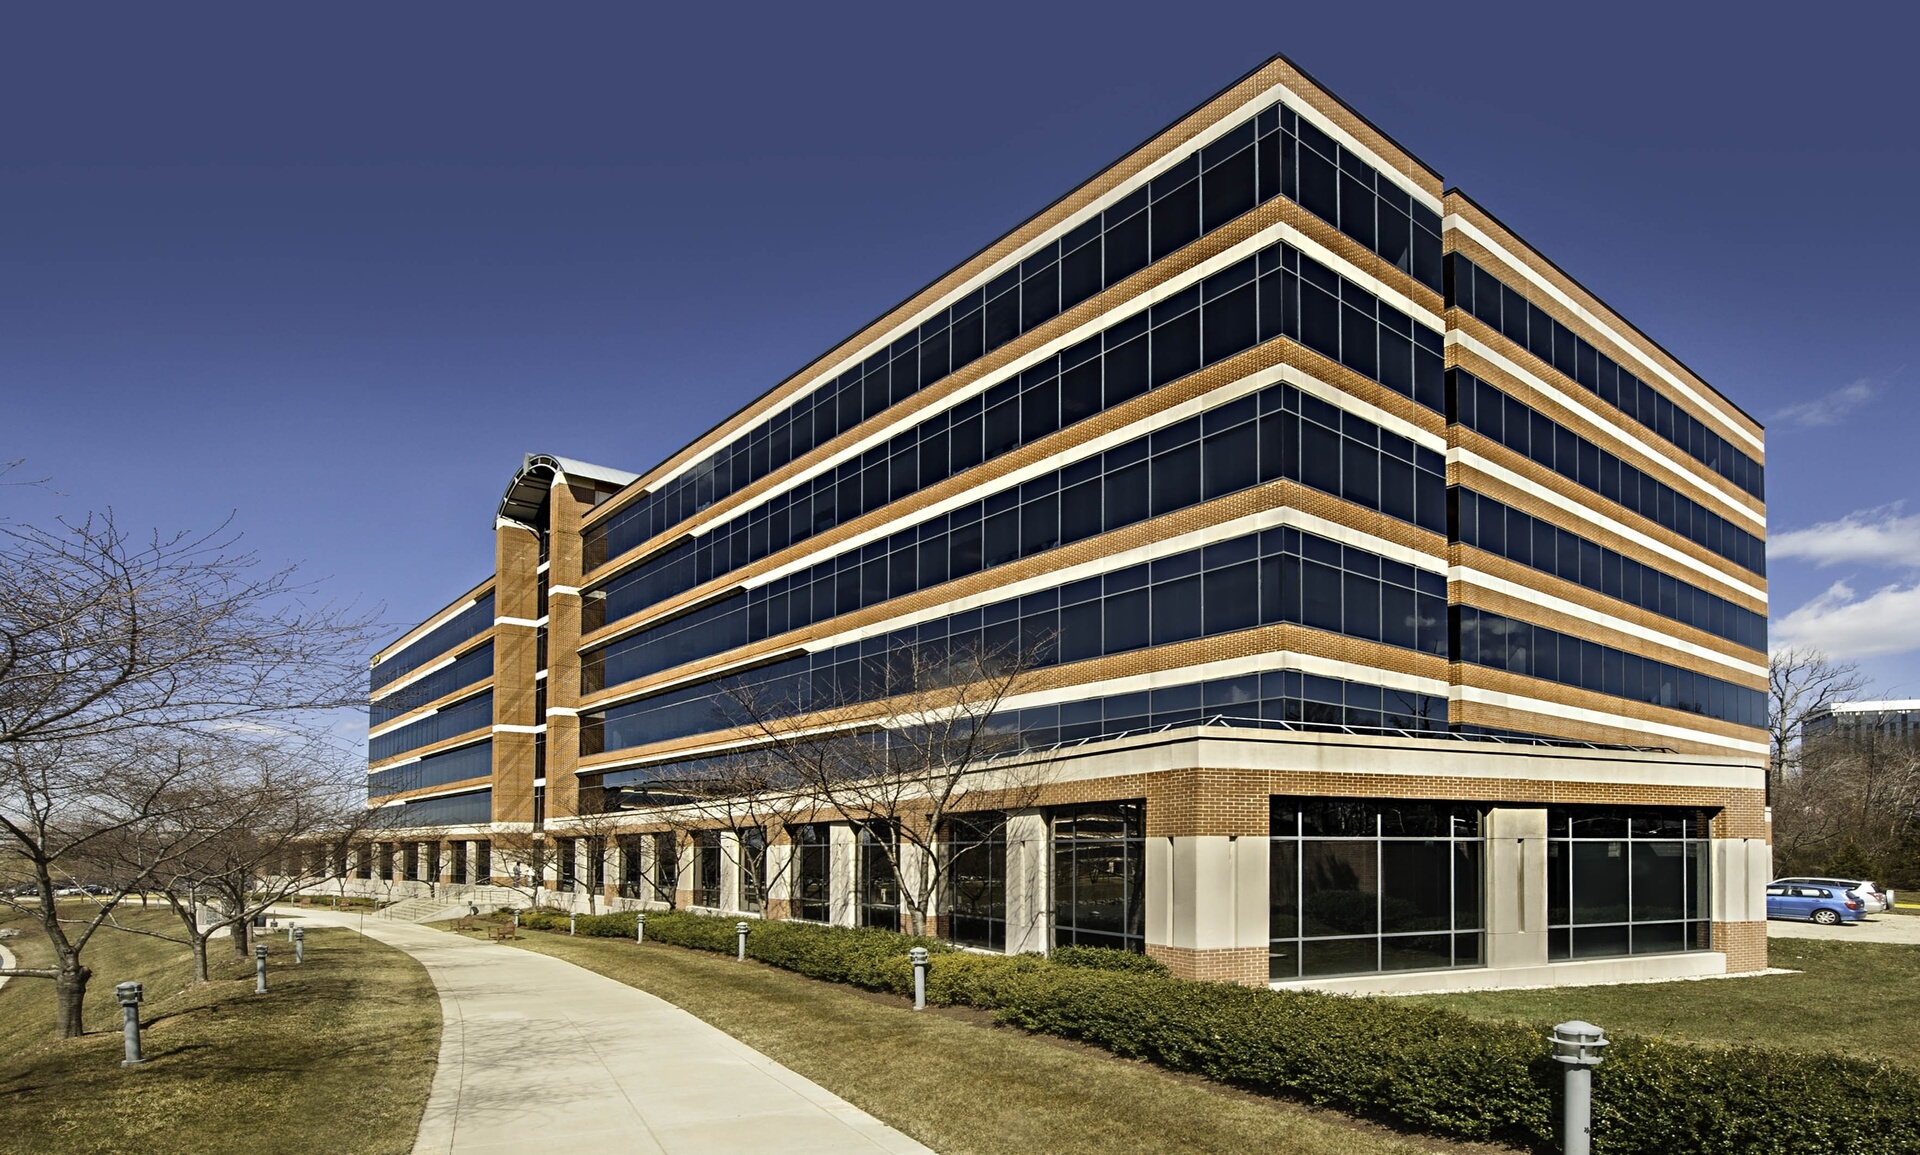 A large, brown brick office complex with dark tinted windows.